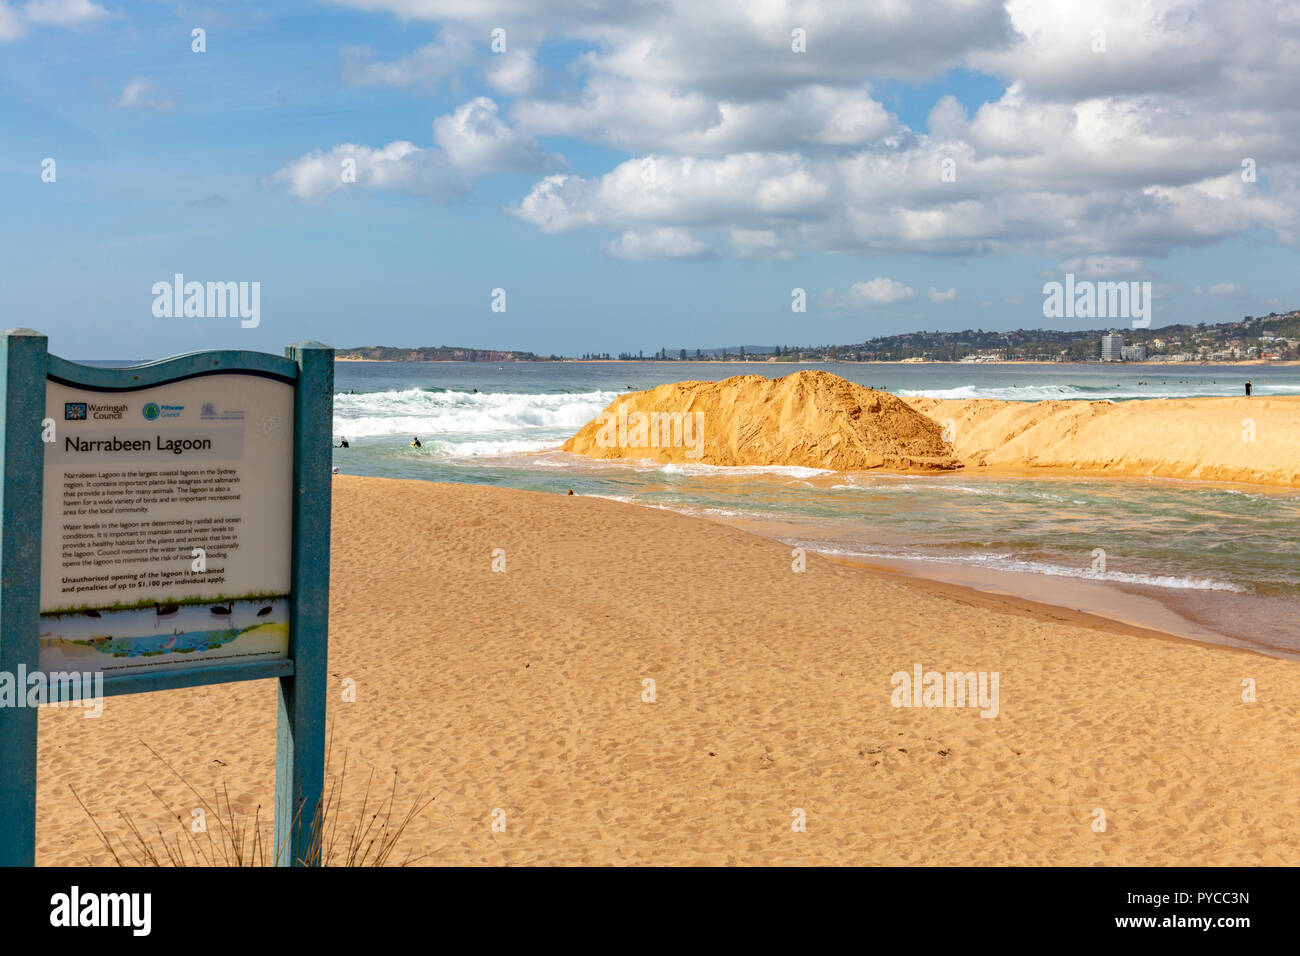 People on North Narrabeen beach beside narrabeen lagoon,Sydney,New South Wales,Australia Stock Photo